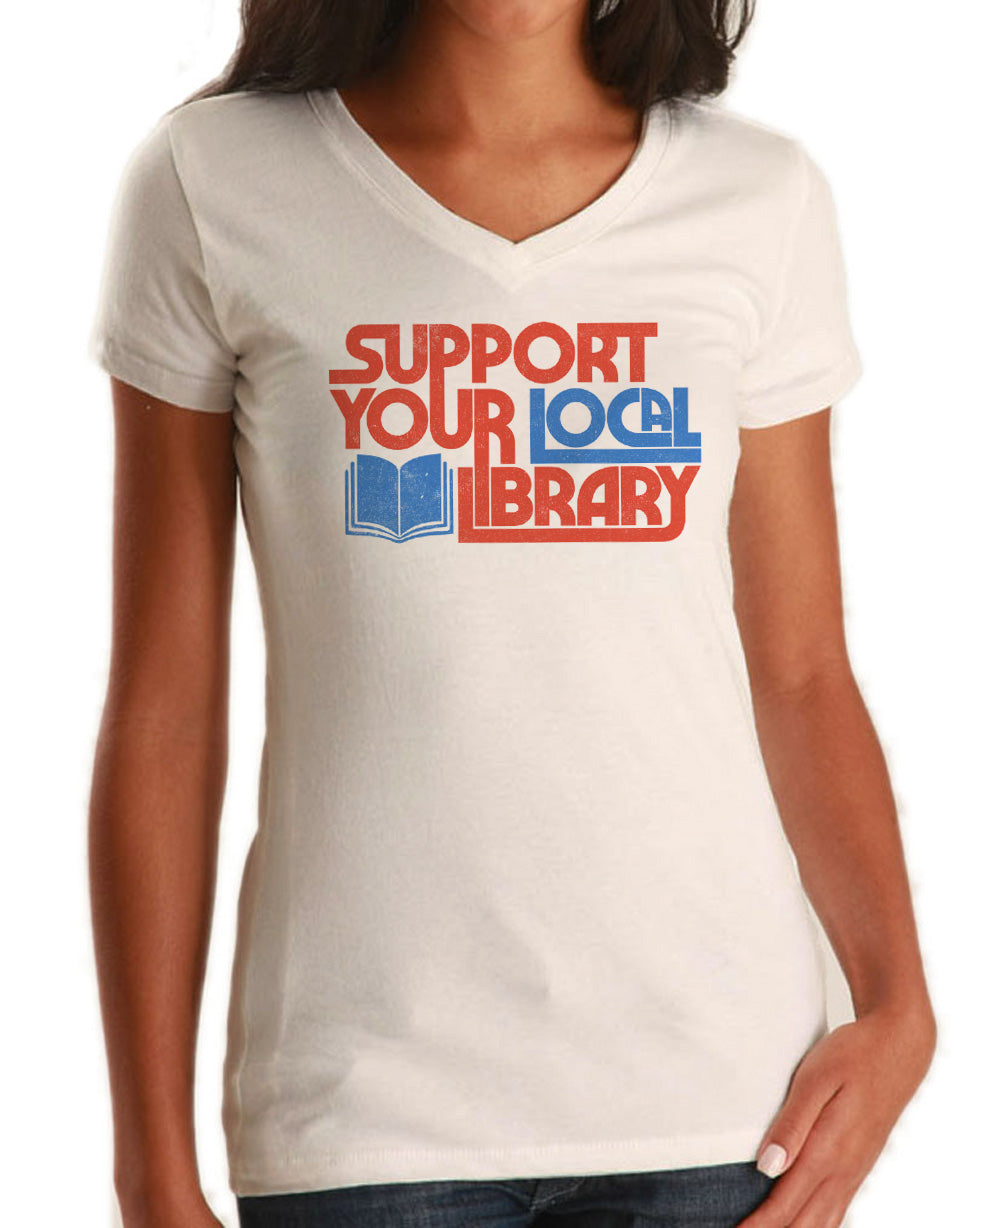 Women's Support Your Local Library Vneck T-Shirt